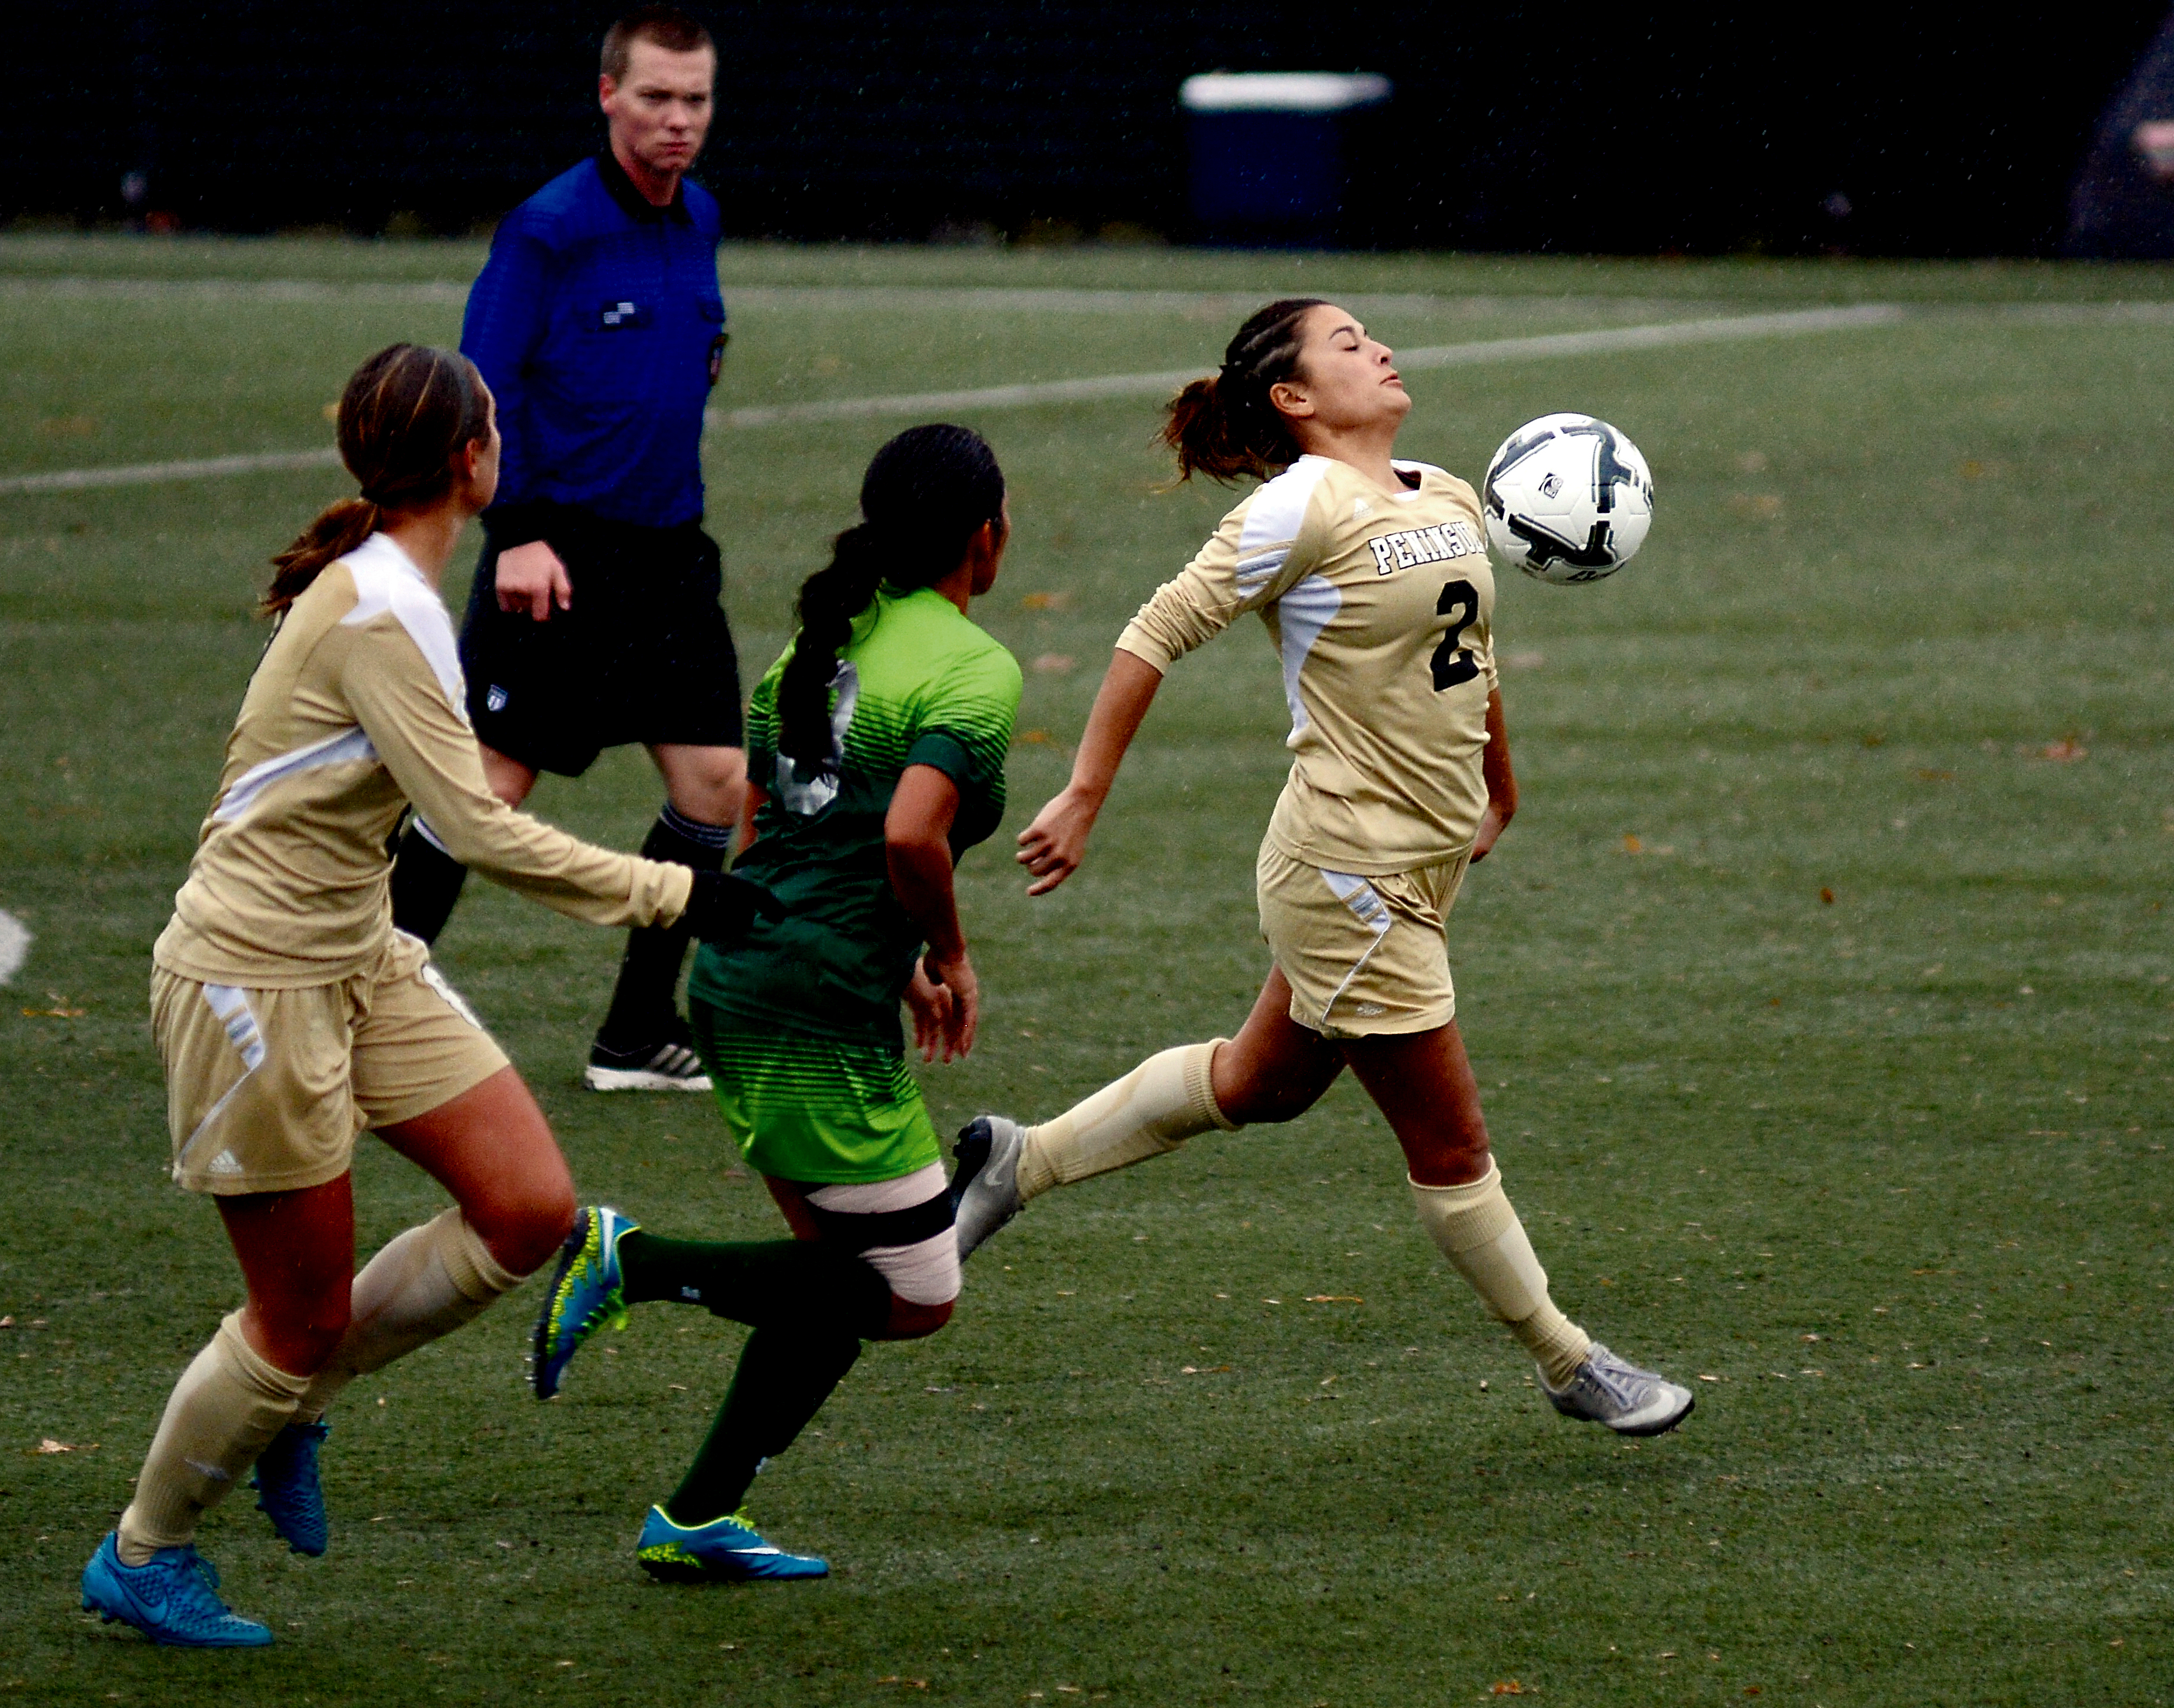 Peninsula College's Olivia Moore controls the ball ahead of Highline's Dulce Armas and teammate Michele Whan during the NWAC semifinals at Starfire Complex in Tukwila on Saturday. Jay Cline/for Peninsula Daily News